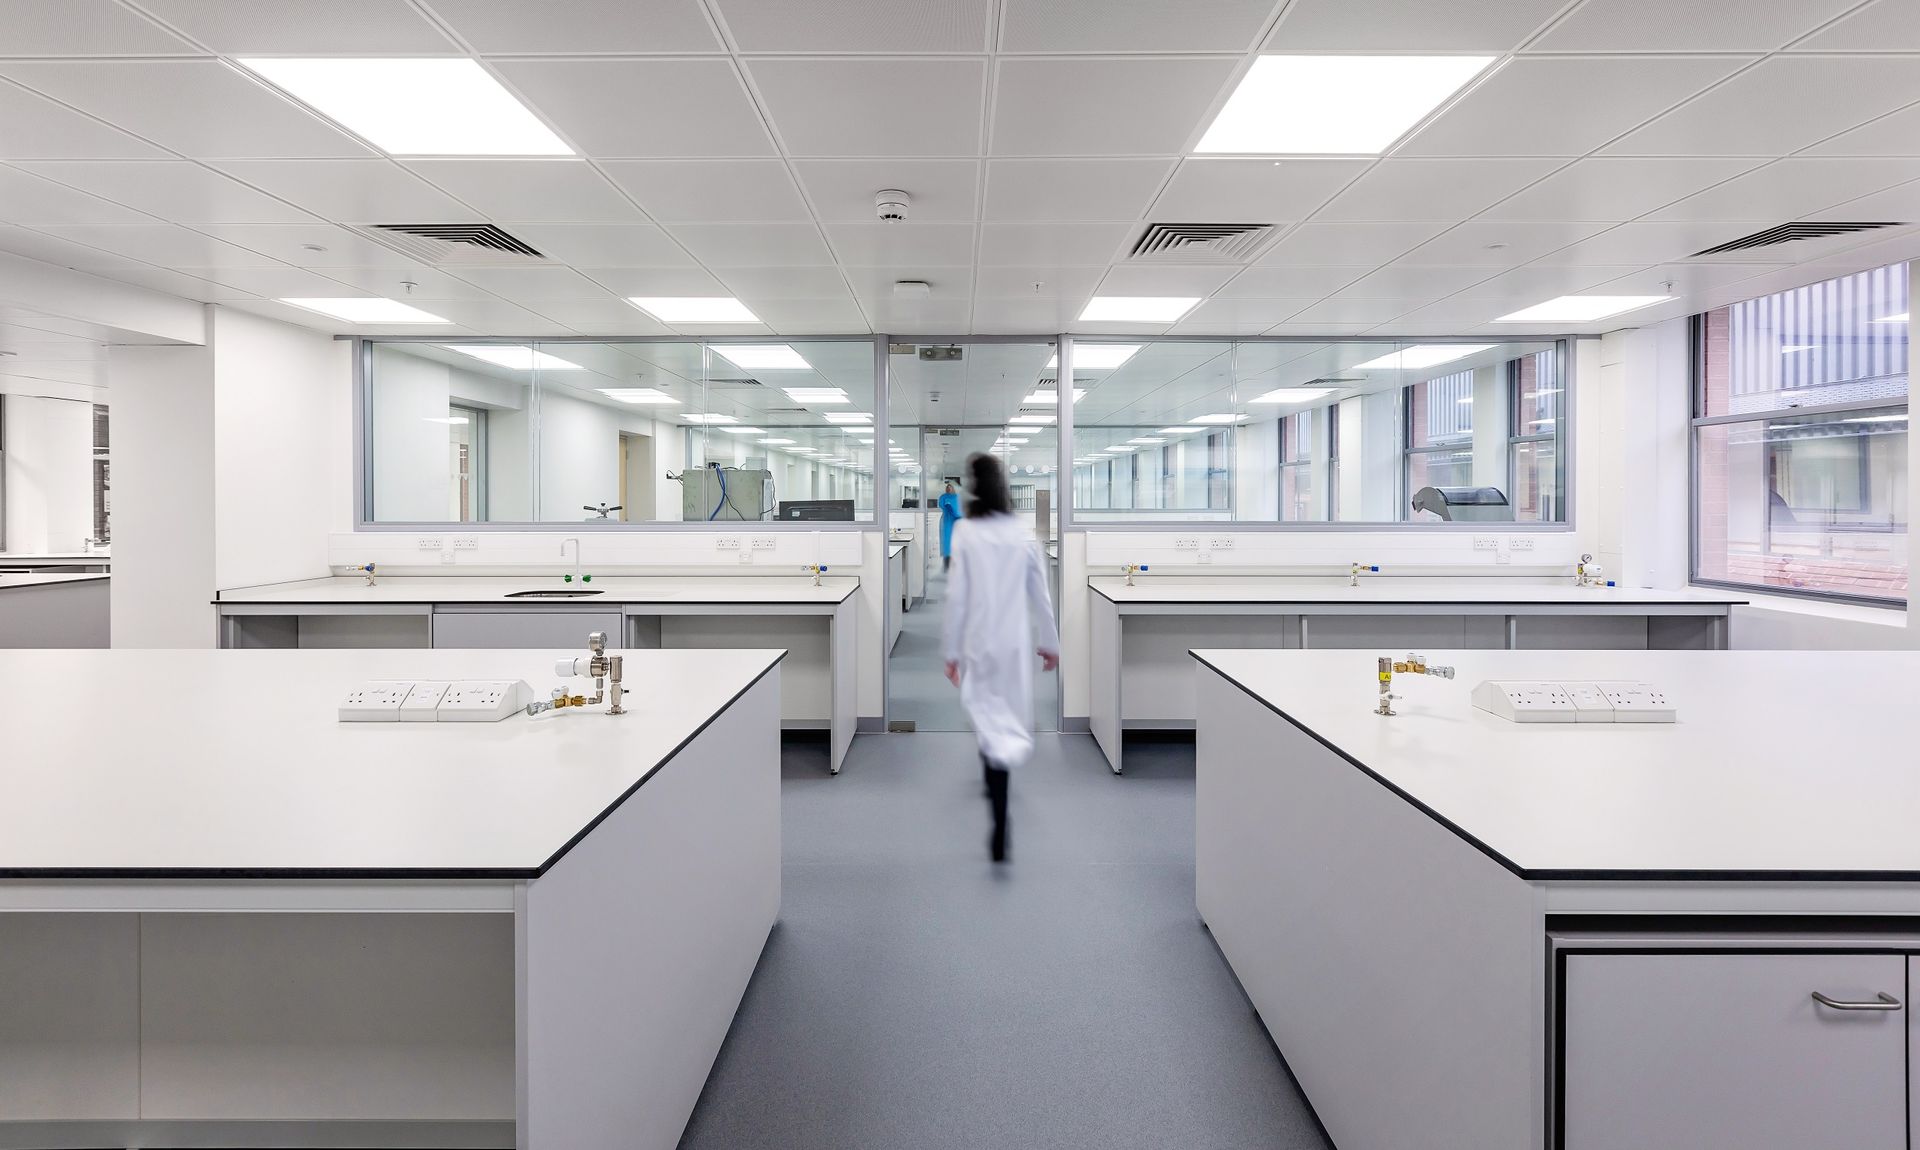 Lady in a lab coat walking through a newly design laboratory space